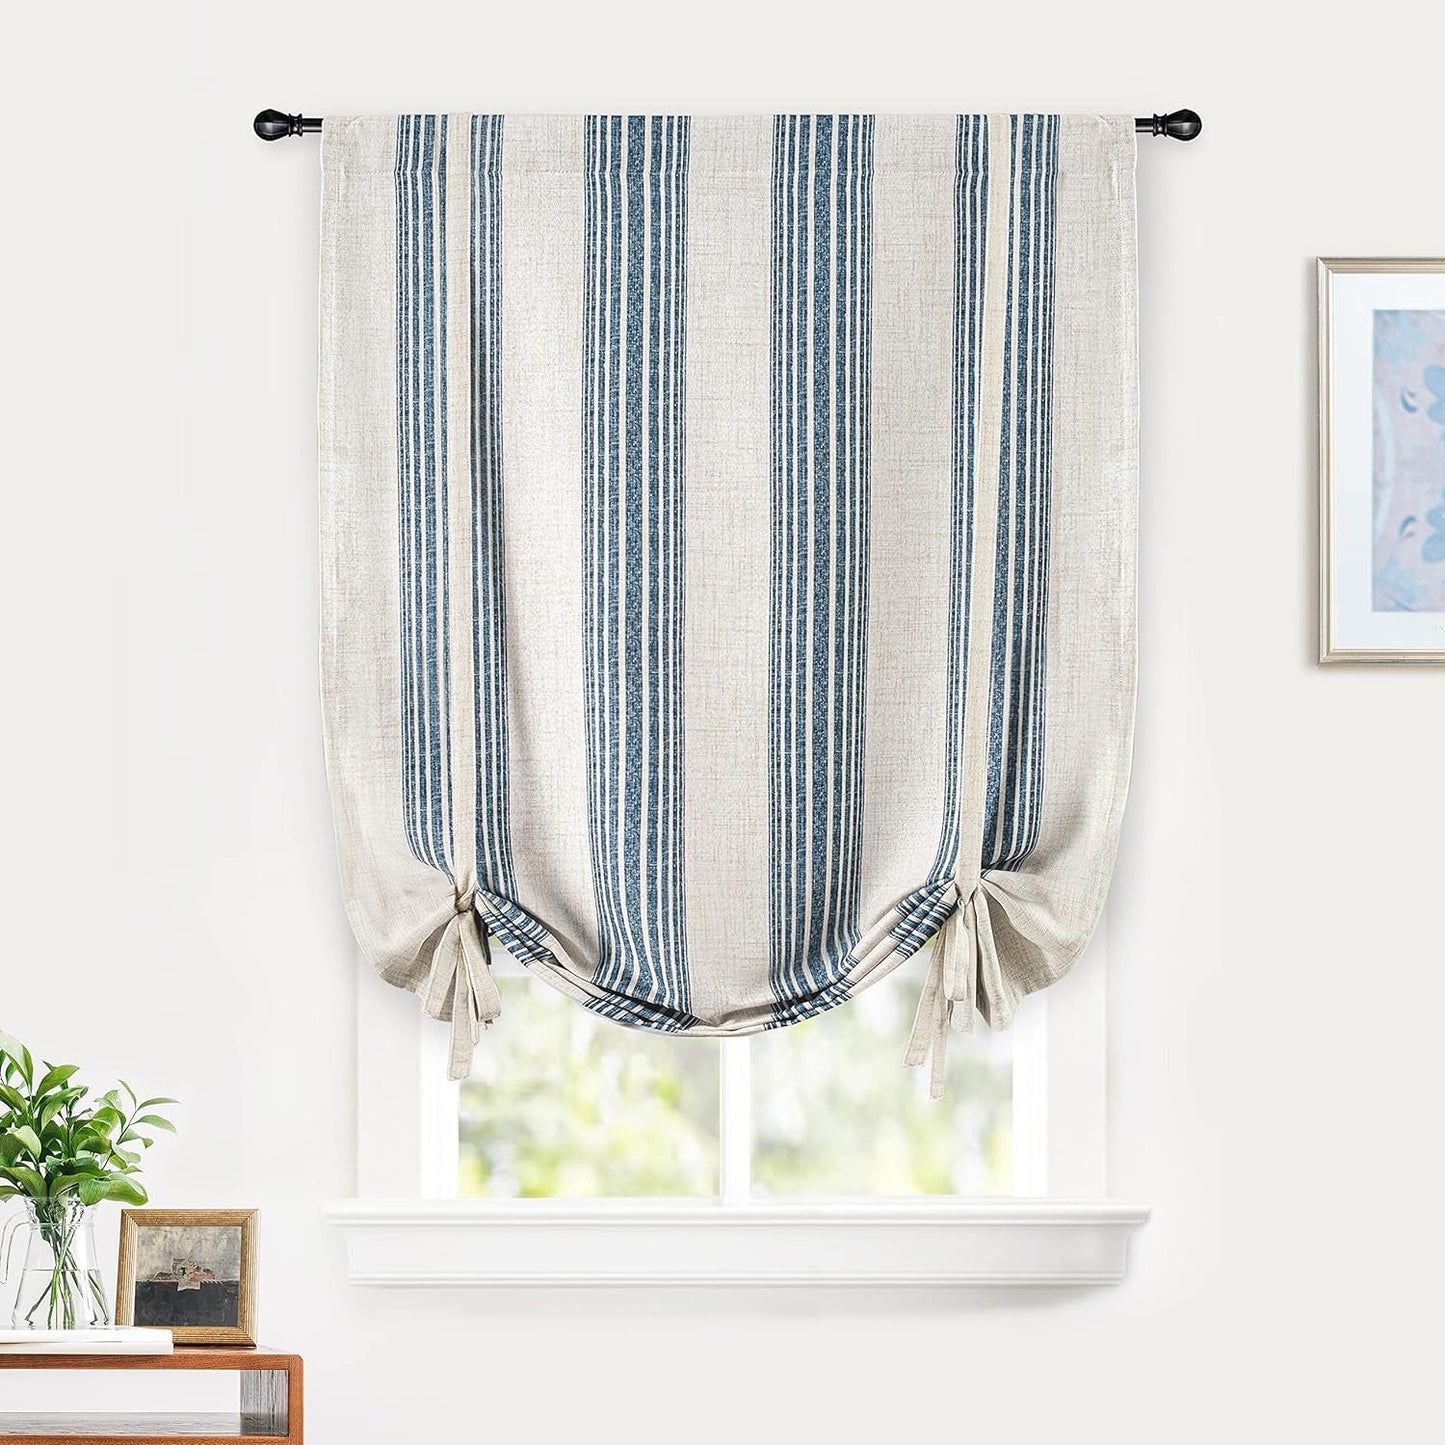 Driftaway Chris Vertical Striped Pattern Blackout Room Darkening Thermal Insulated Tie up Adjustable Balloon Rod Pocket Curtain for Small Window 45 Inch by 63 Inch Gray